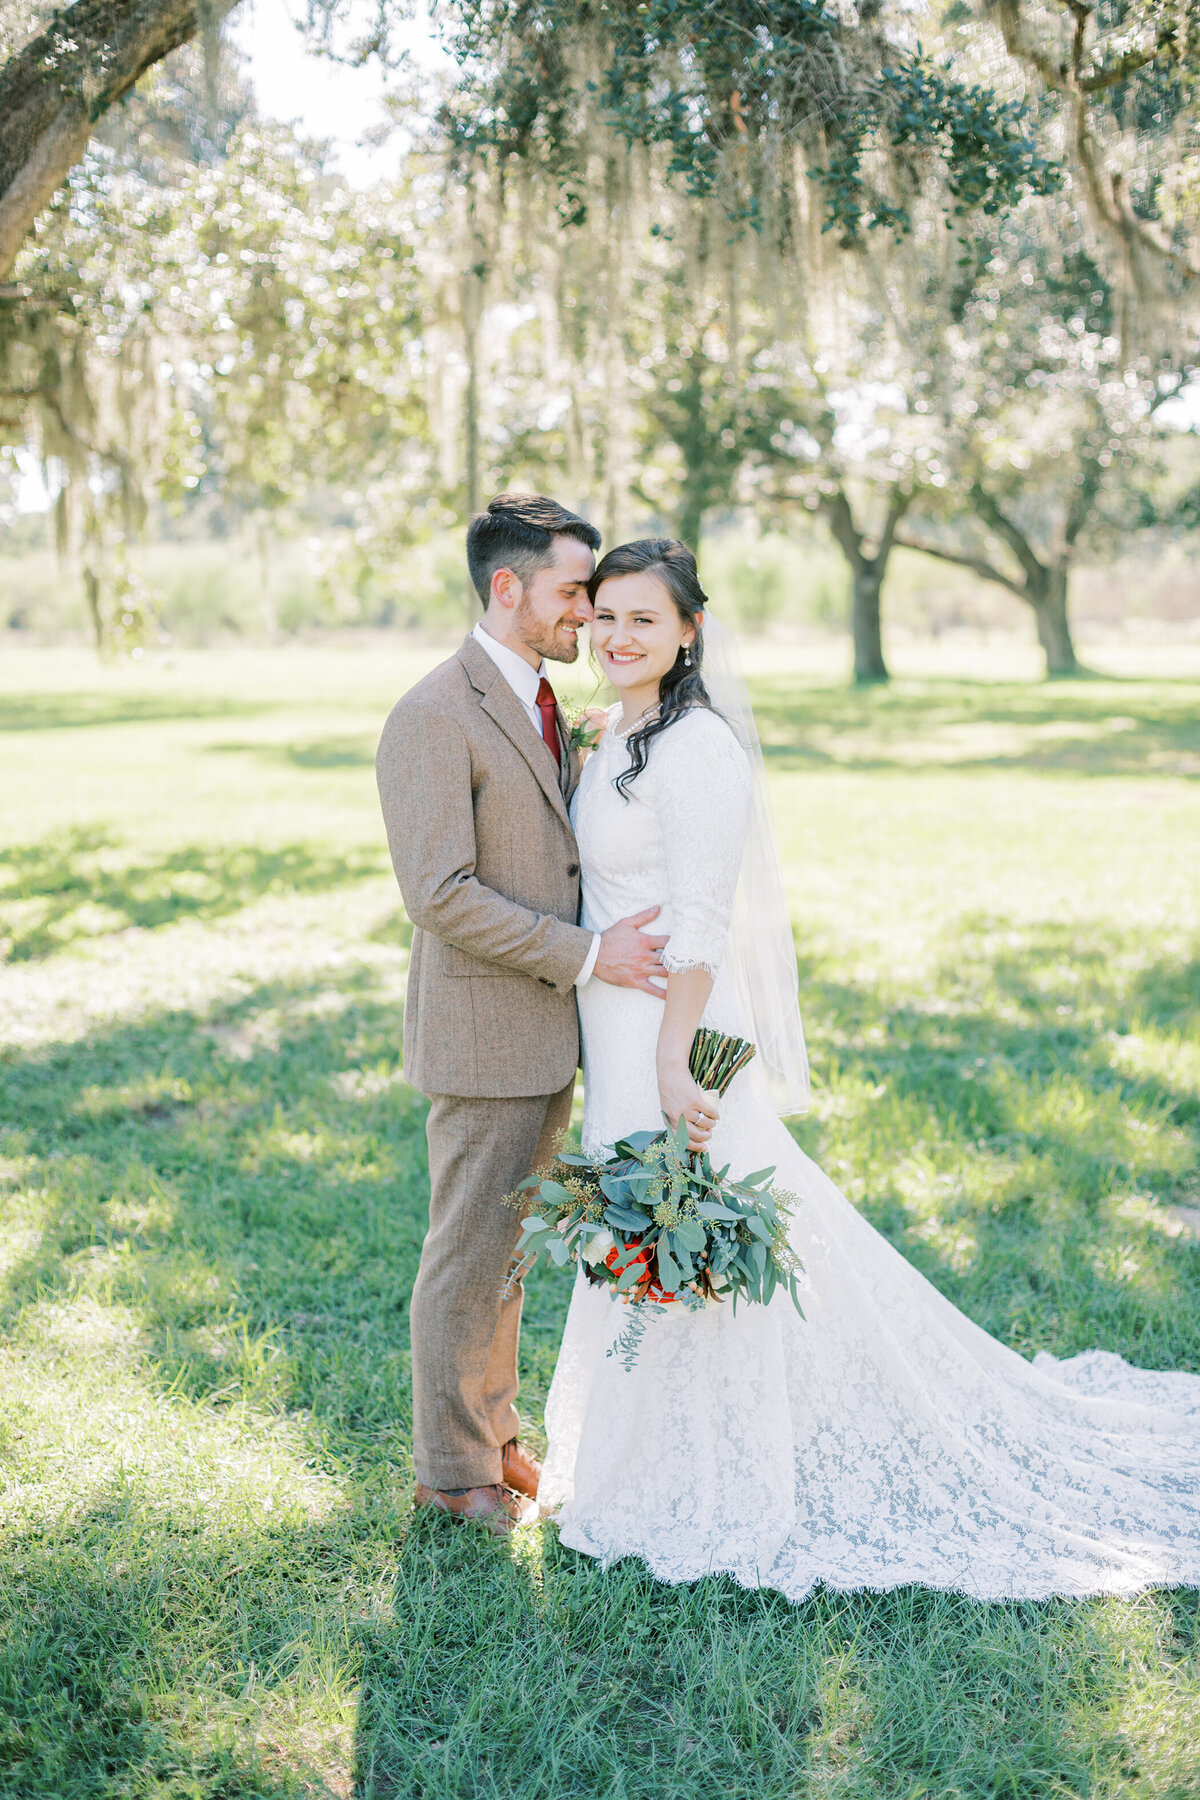 Ink & Willow Photography | Meet Our Photographers | Wedding and Lifestyle Photographers | Victoria TX